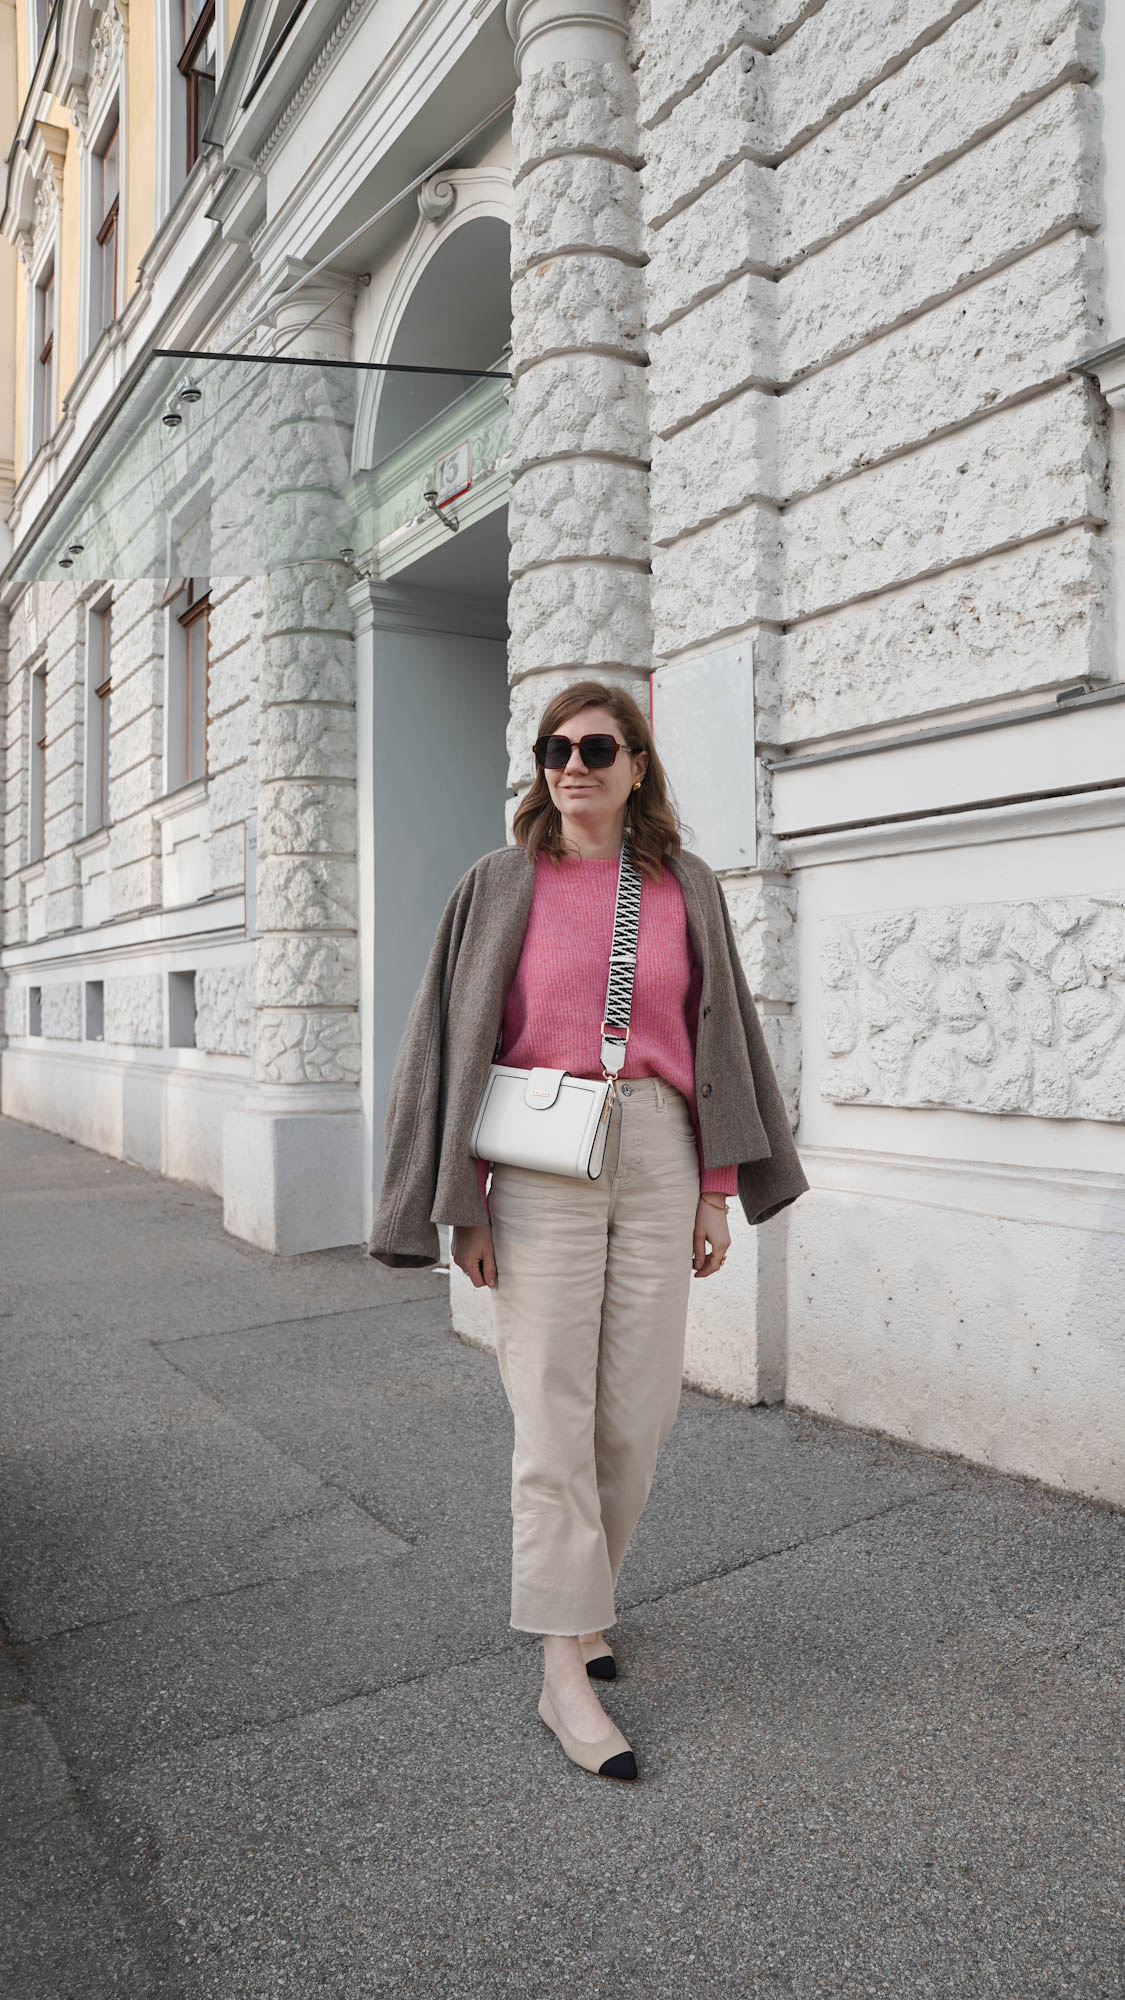 Sezane, Pullover, sweater, knitwear, pink, beige jeans, straight jeans, ballerinas, white bag, casual, streetstyle, blog